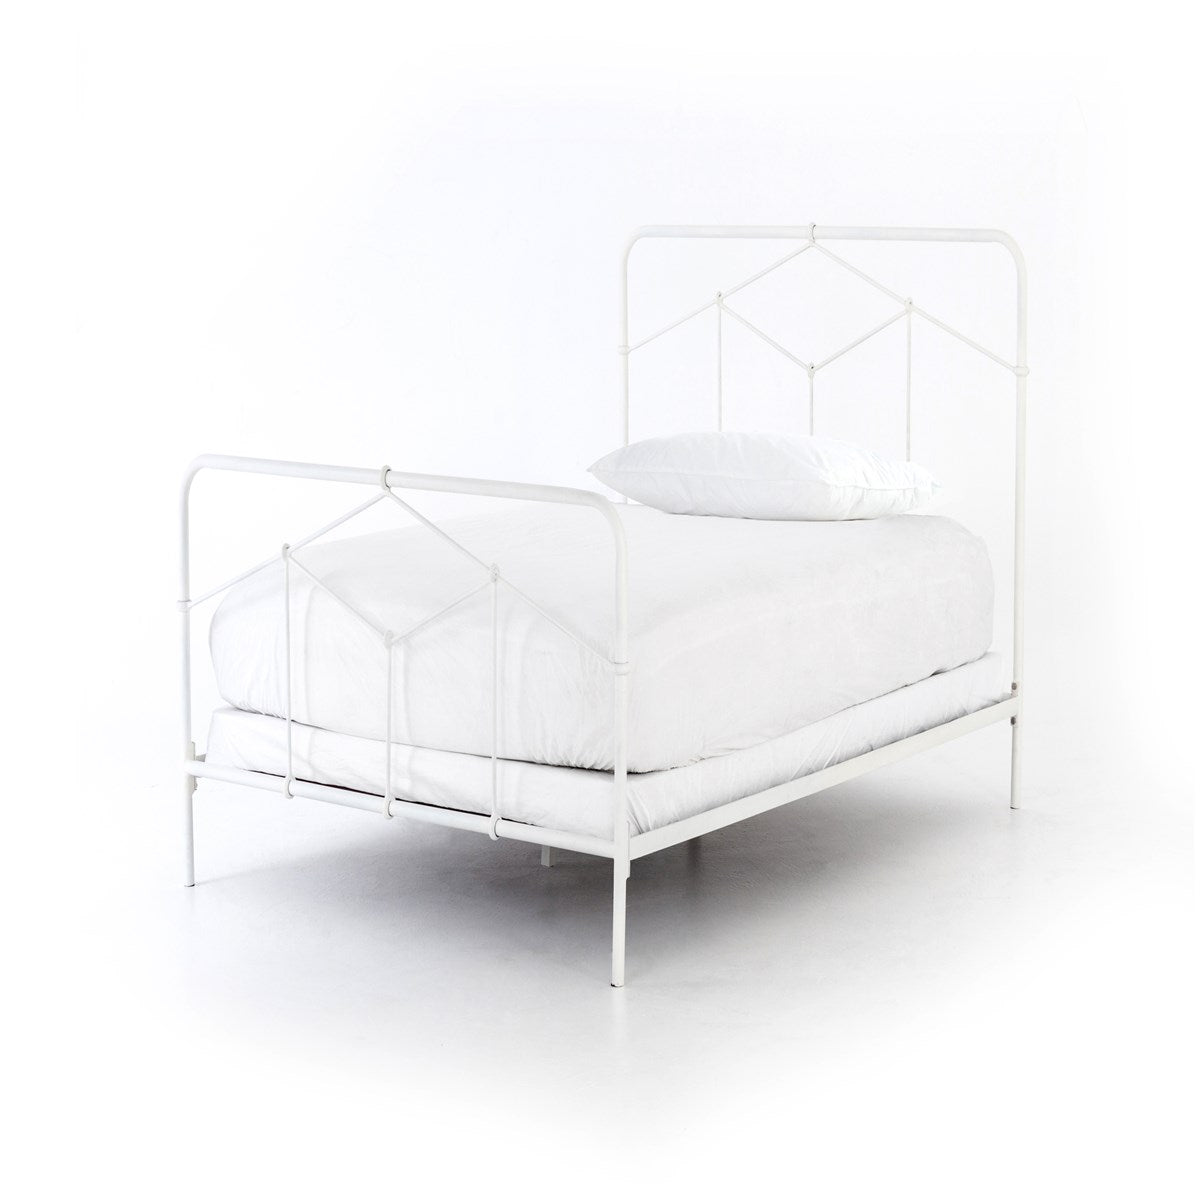 Casey Bed White / TwinBed Four Hands  White Twin  Four Hands, Burke Decor, Mid Century Modern Furniture, Old Bones Furniture Company, Old Bones Co, Modern Mid Century, Designer Furniture, https://www.oldbonesco.com/